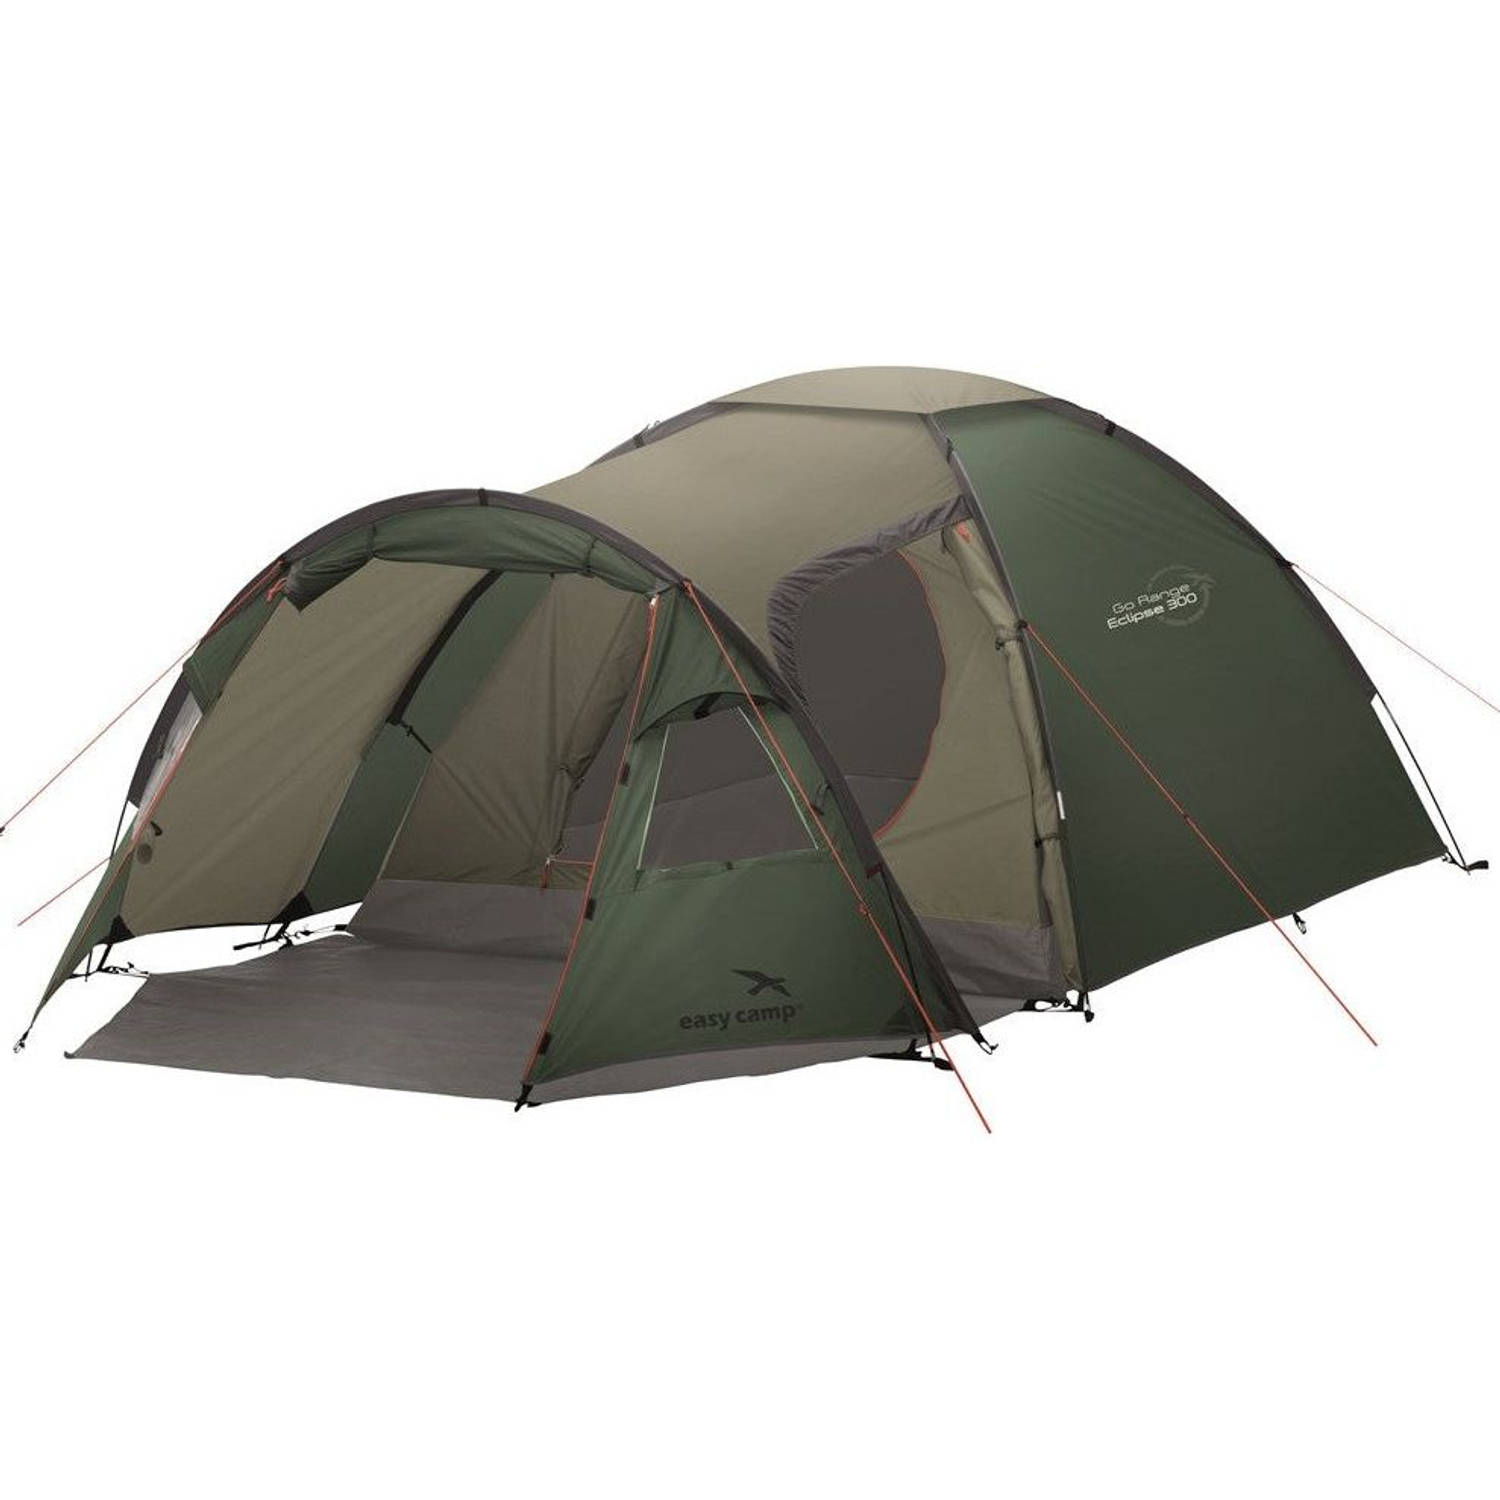 Easy Camp Easy Camp Eclipse 300 tent